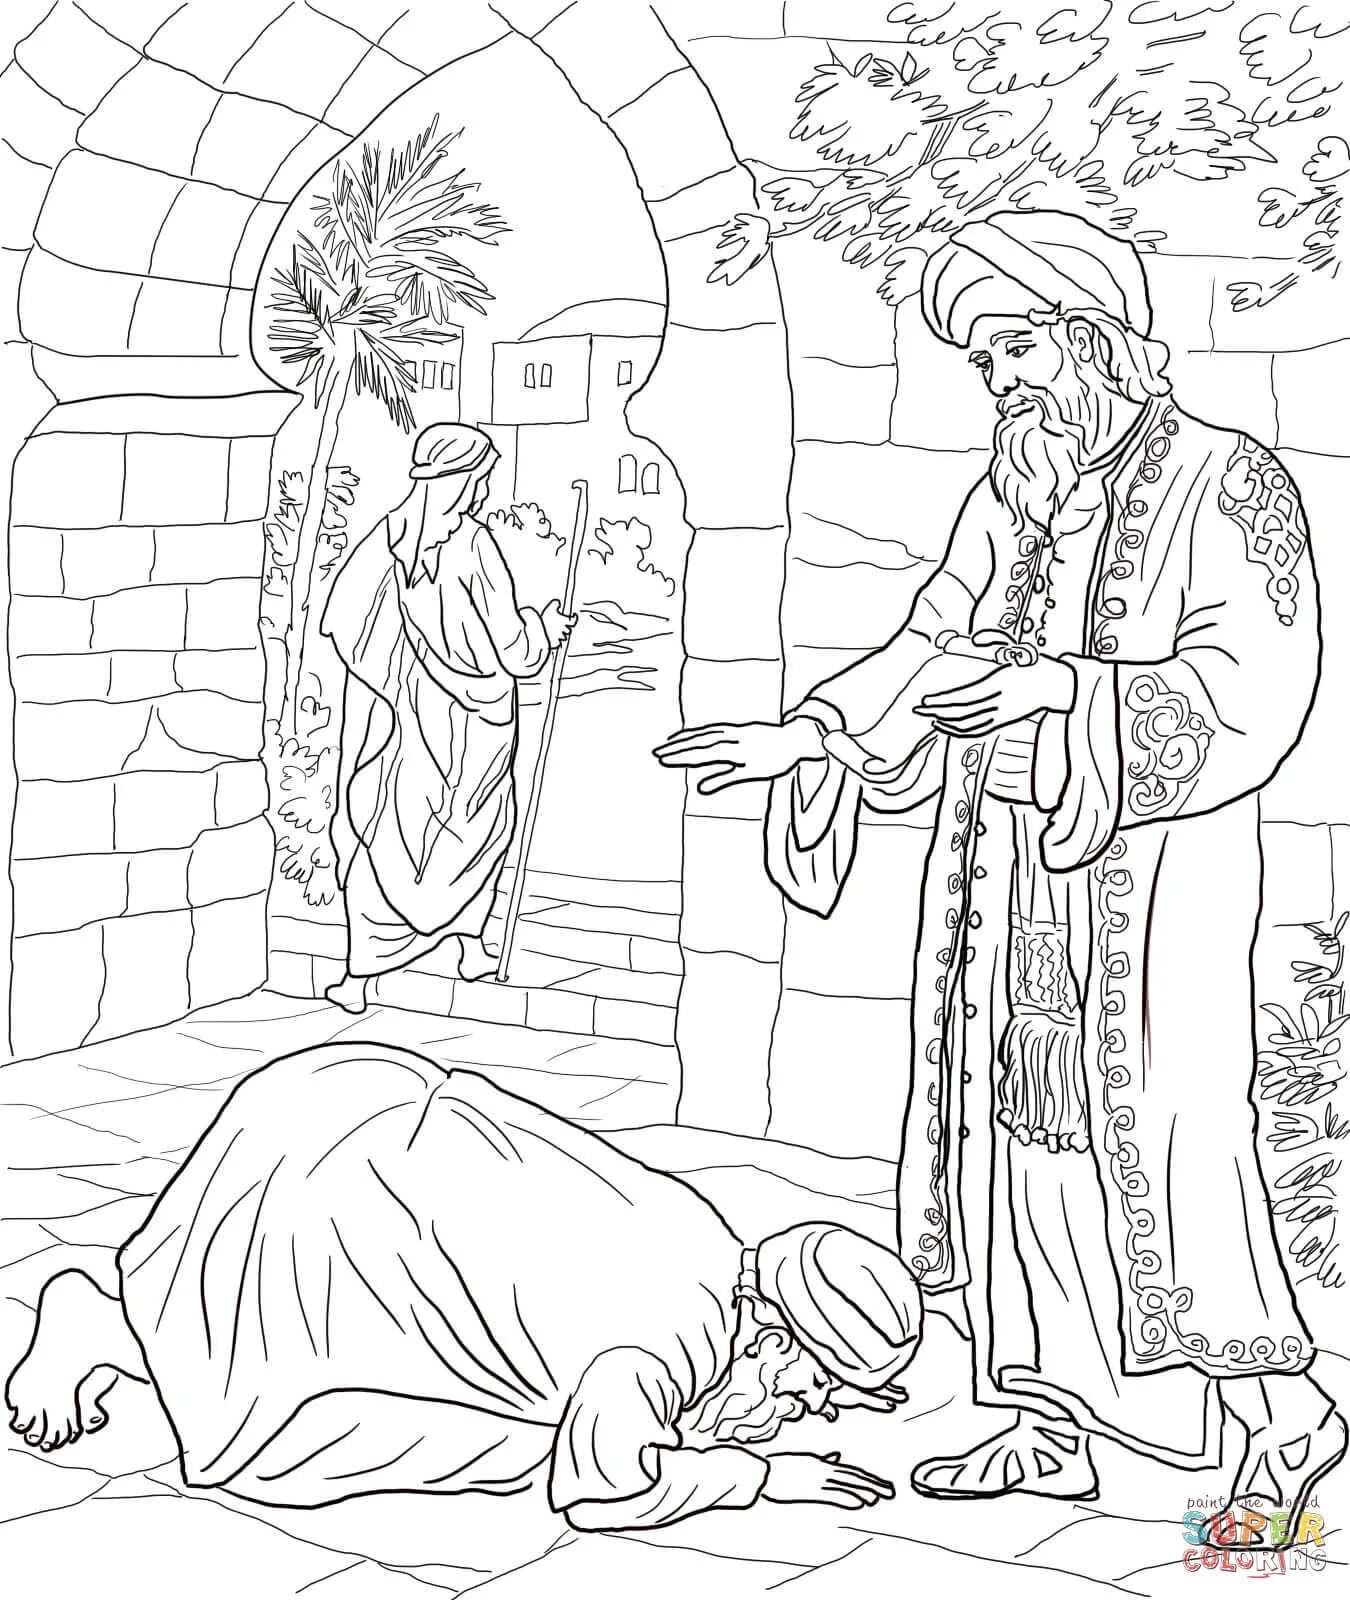 Prodigal son's brilliant week coloring page